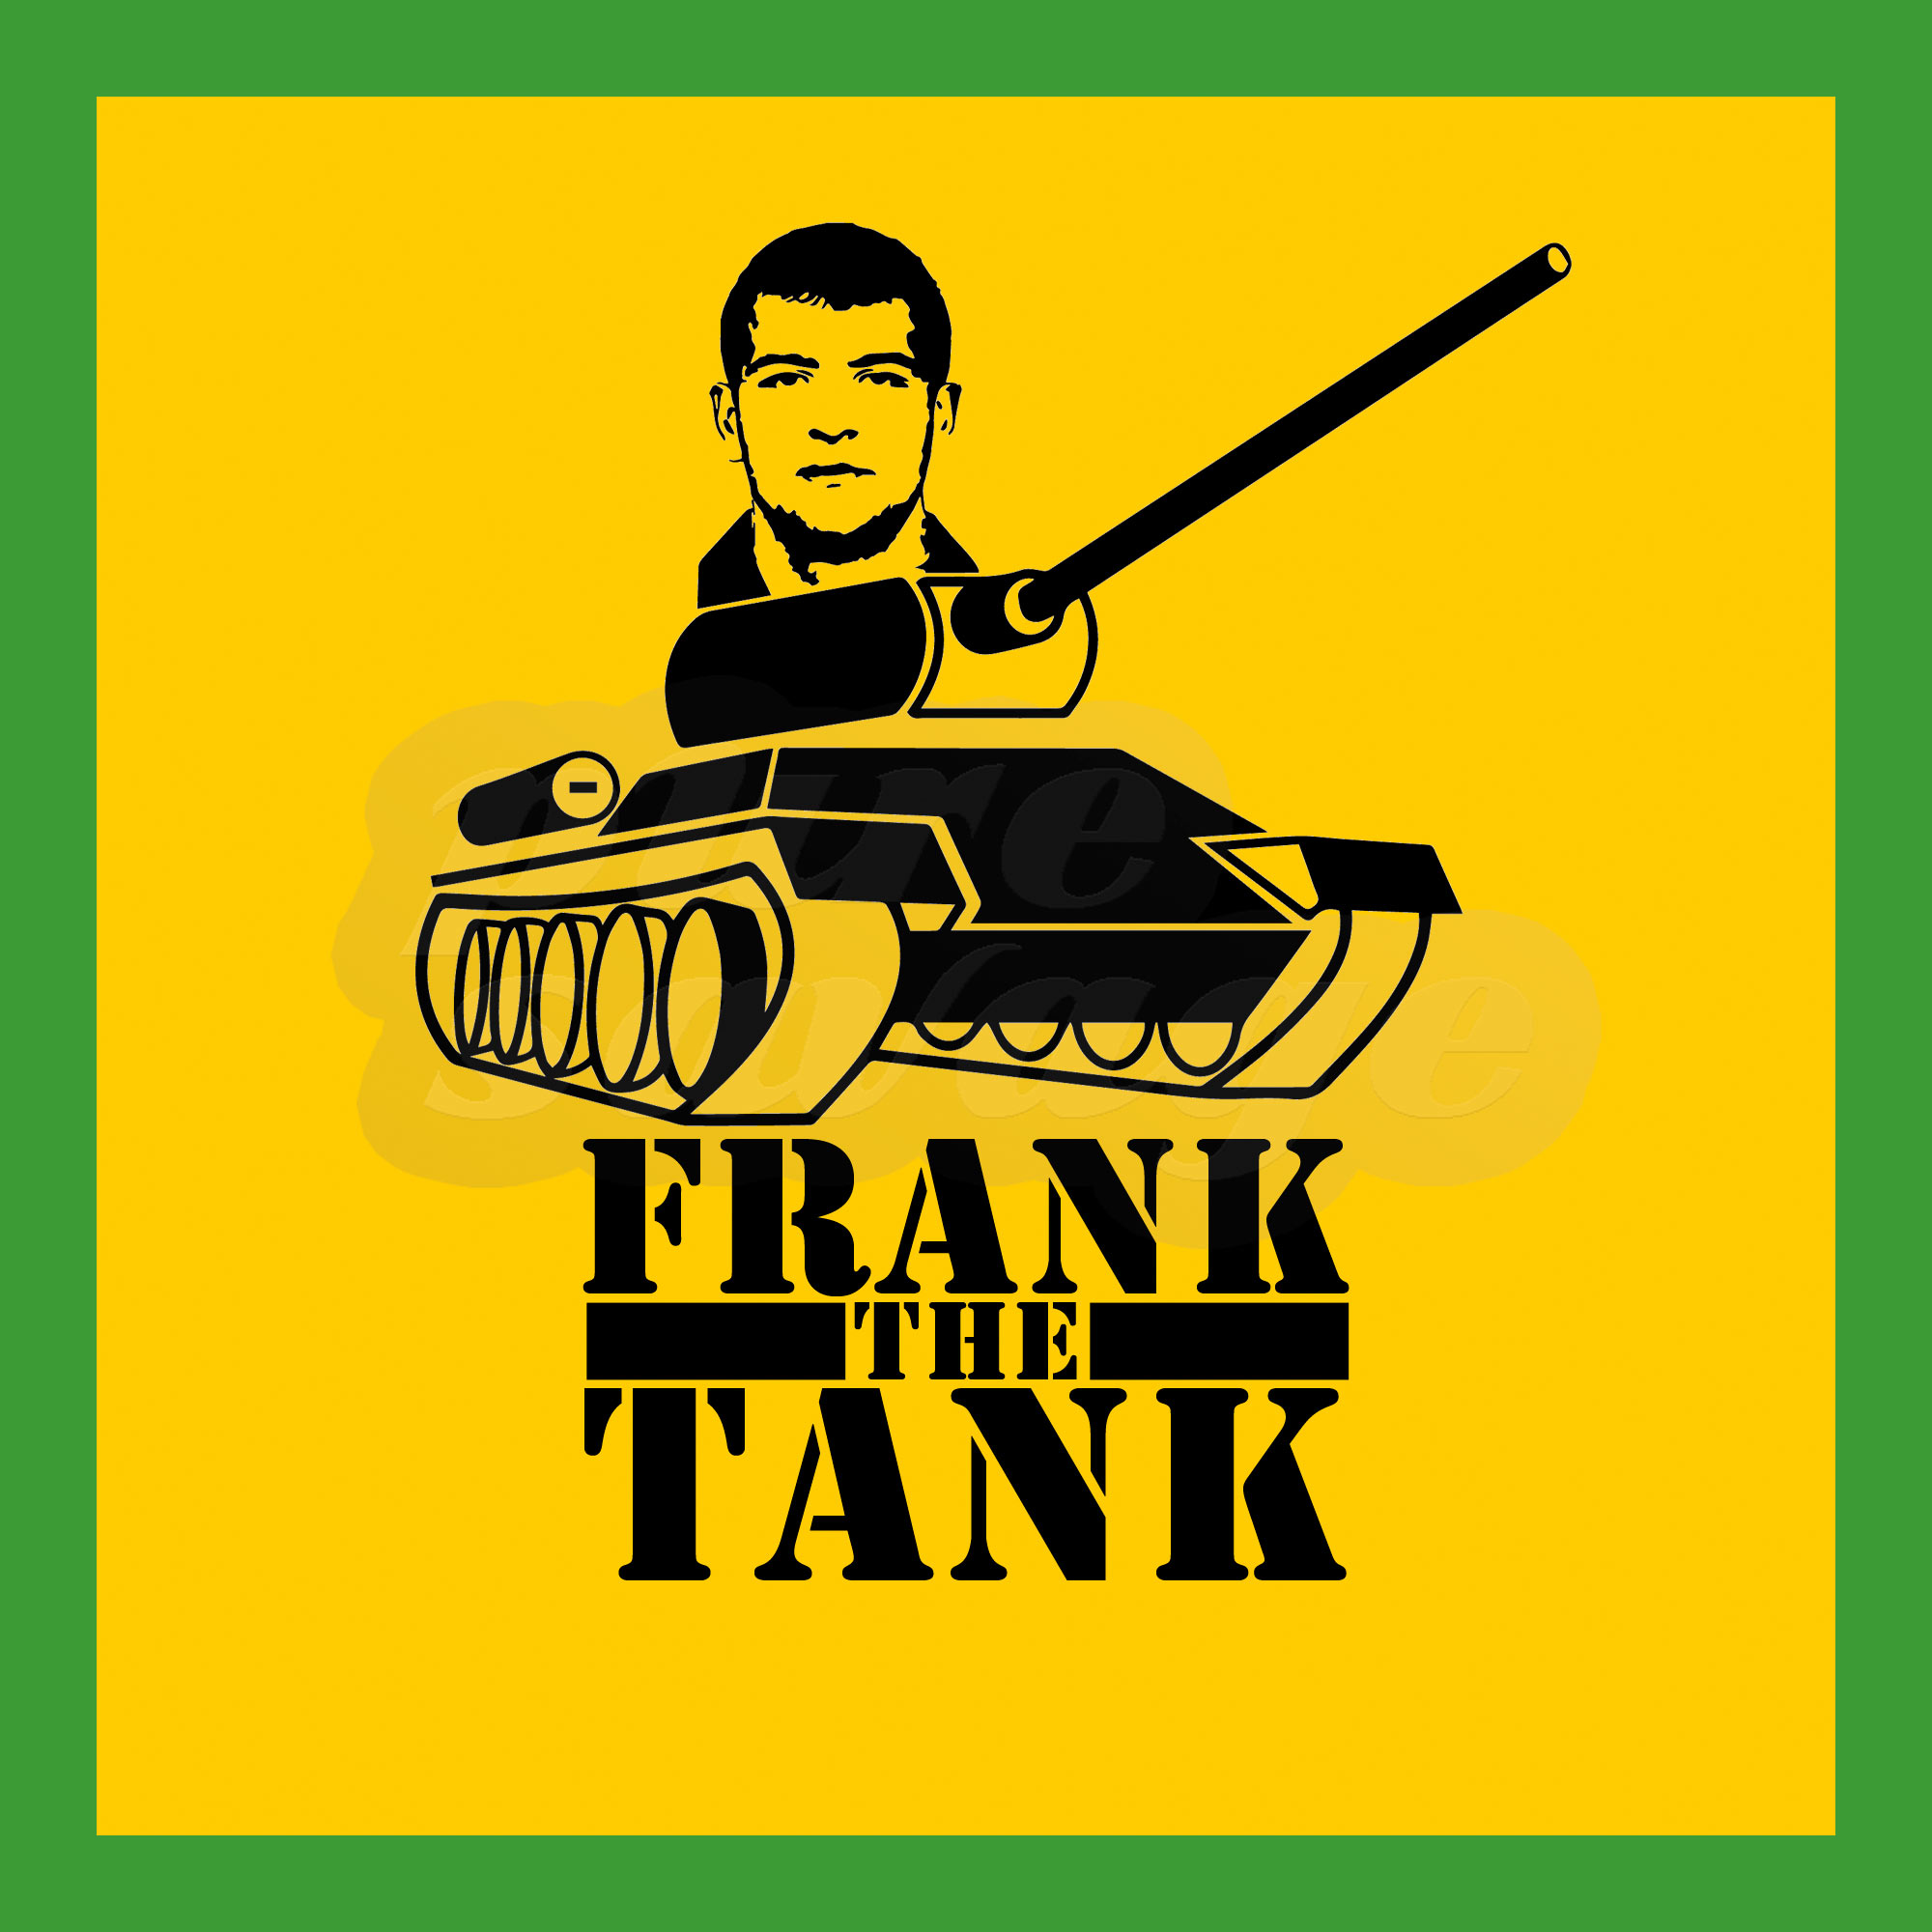 Frank The Tank Quotes. QuotesGram